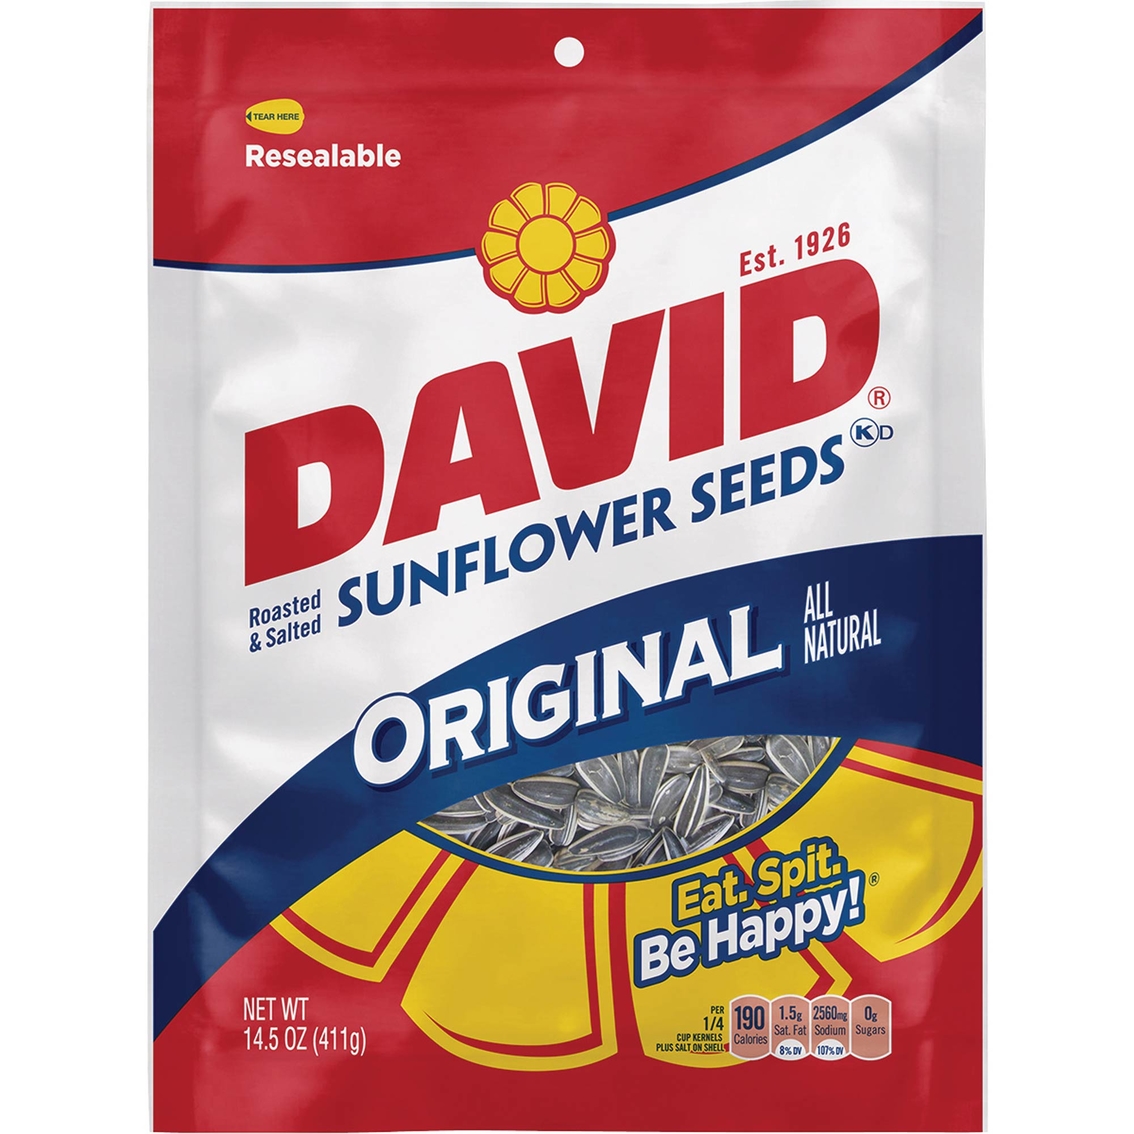 Detail David Sunflower Seed Shoes Nomer 54